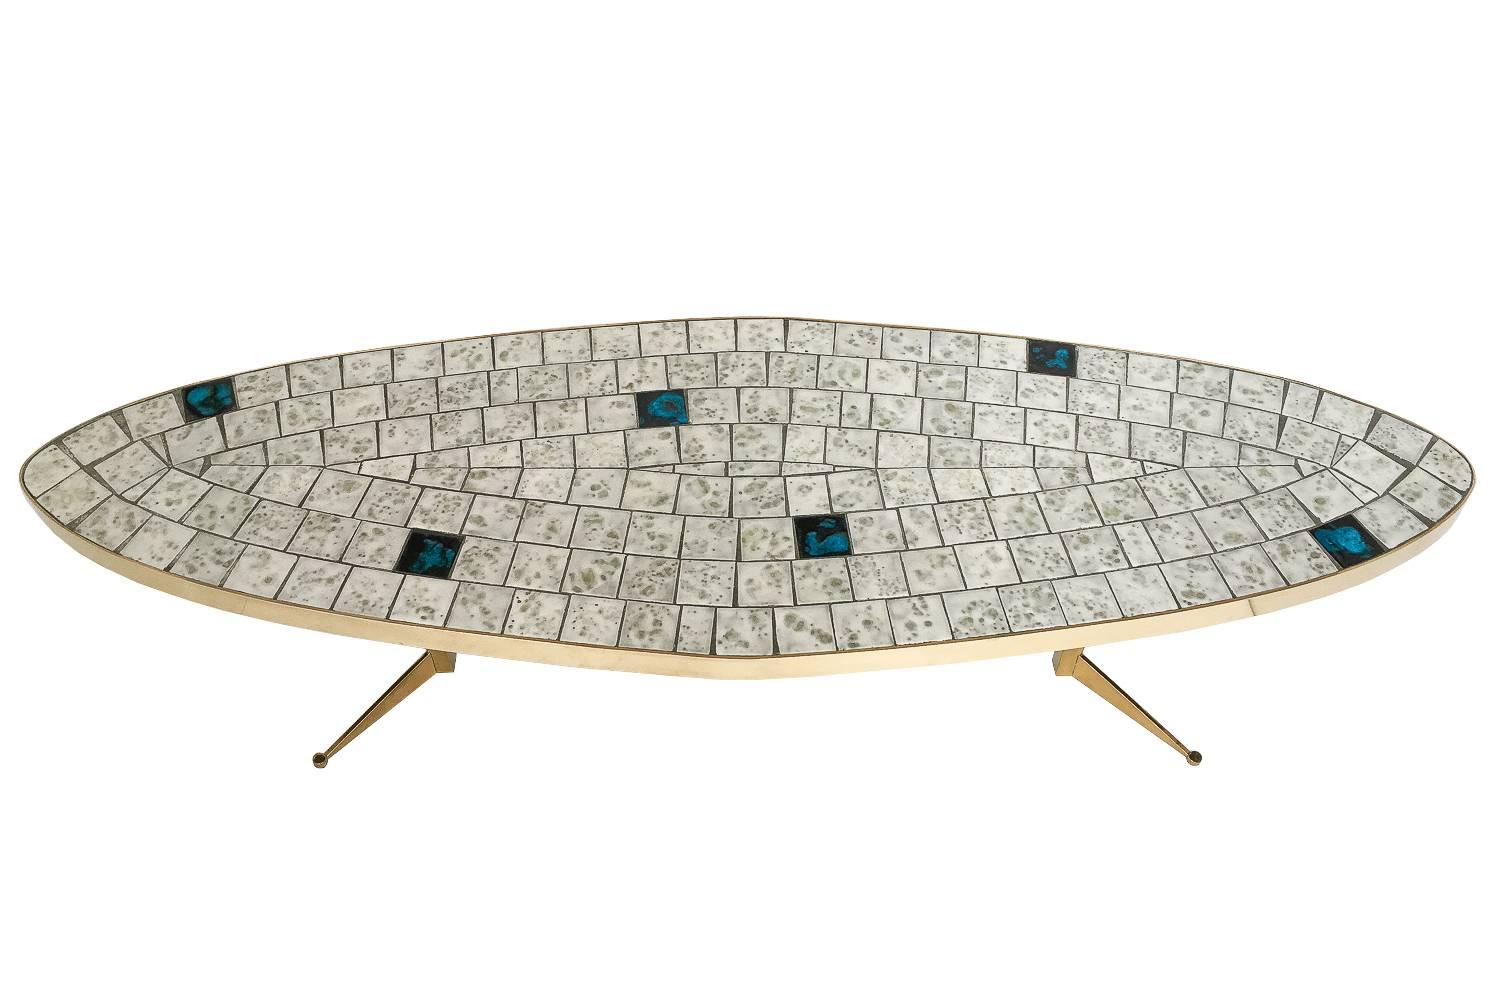 Italian brass framed tiled top coffee table, circa 1950s. Solid brass 1.5